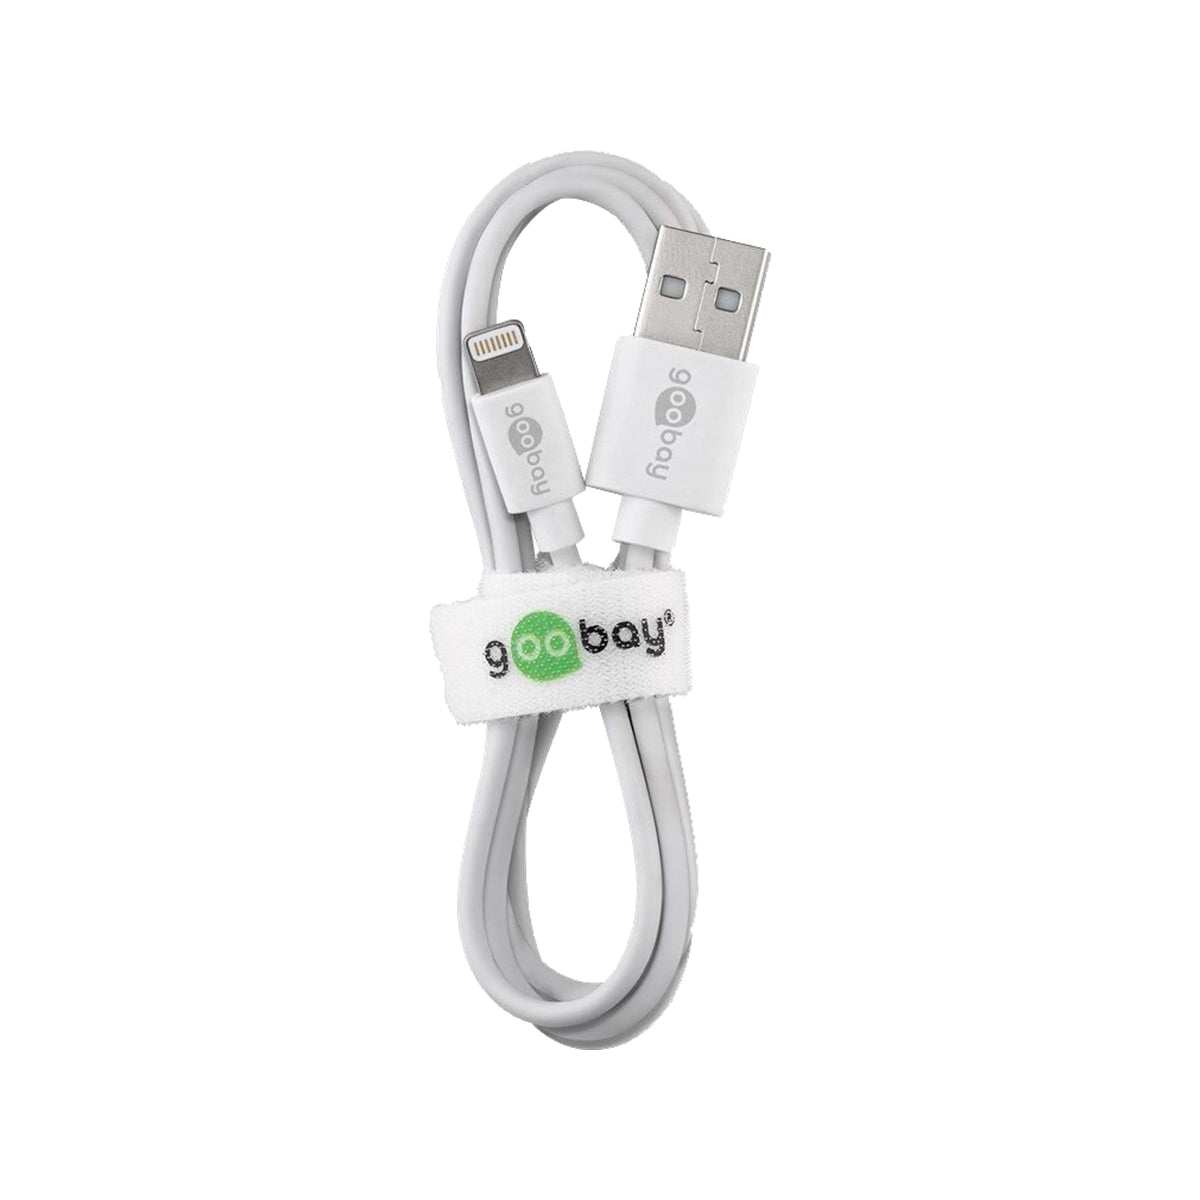 Goobay USB-A to Lightning Charging and Sync Cable 1m for iPhone/iPad/iPod/AirPod - White